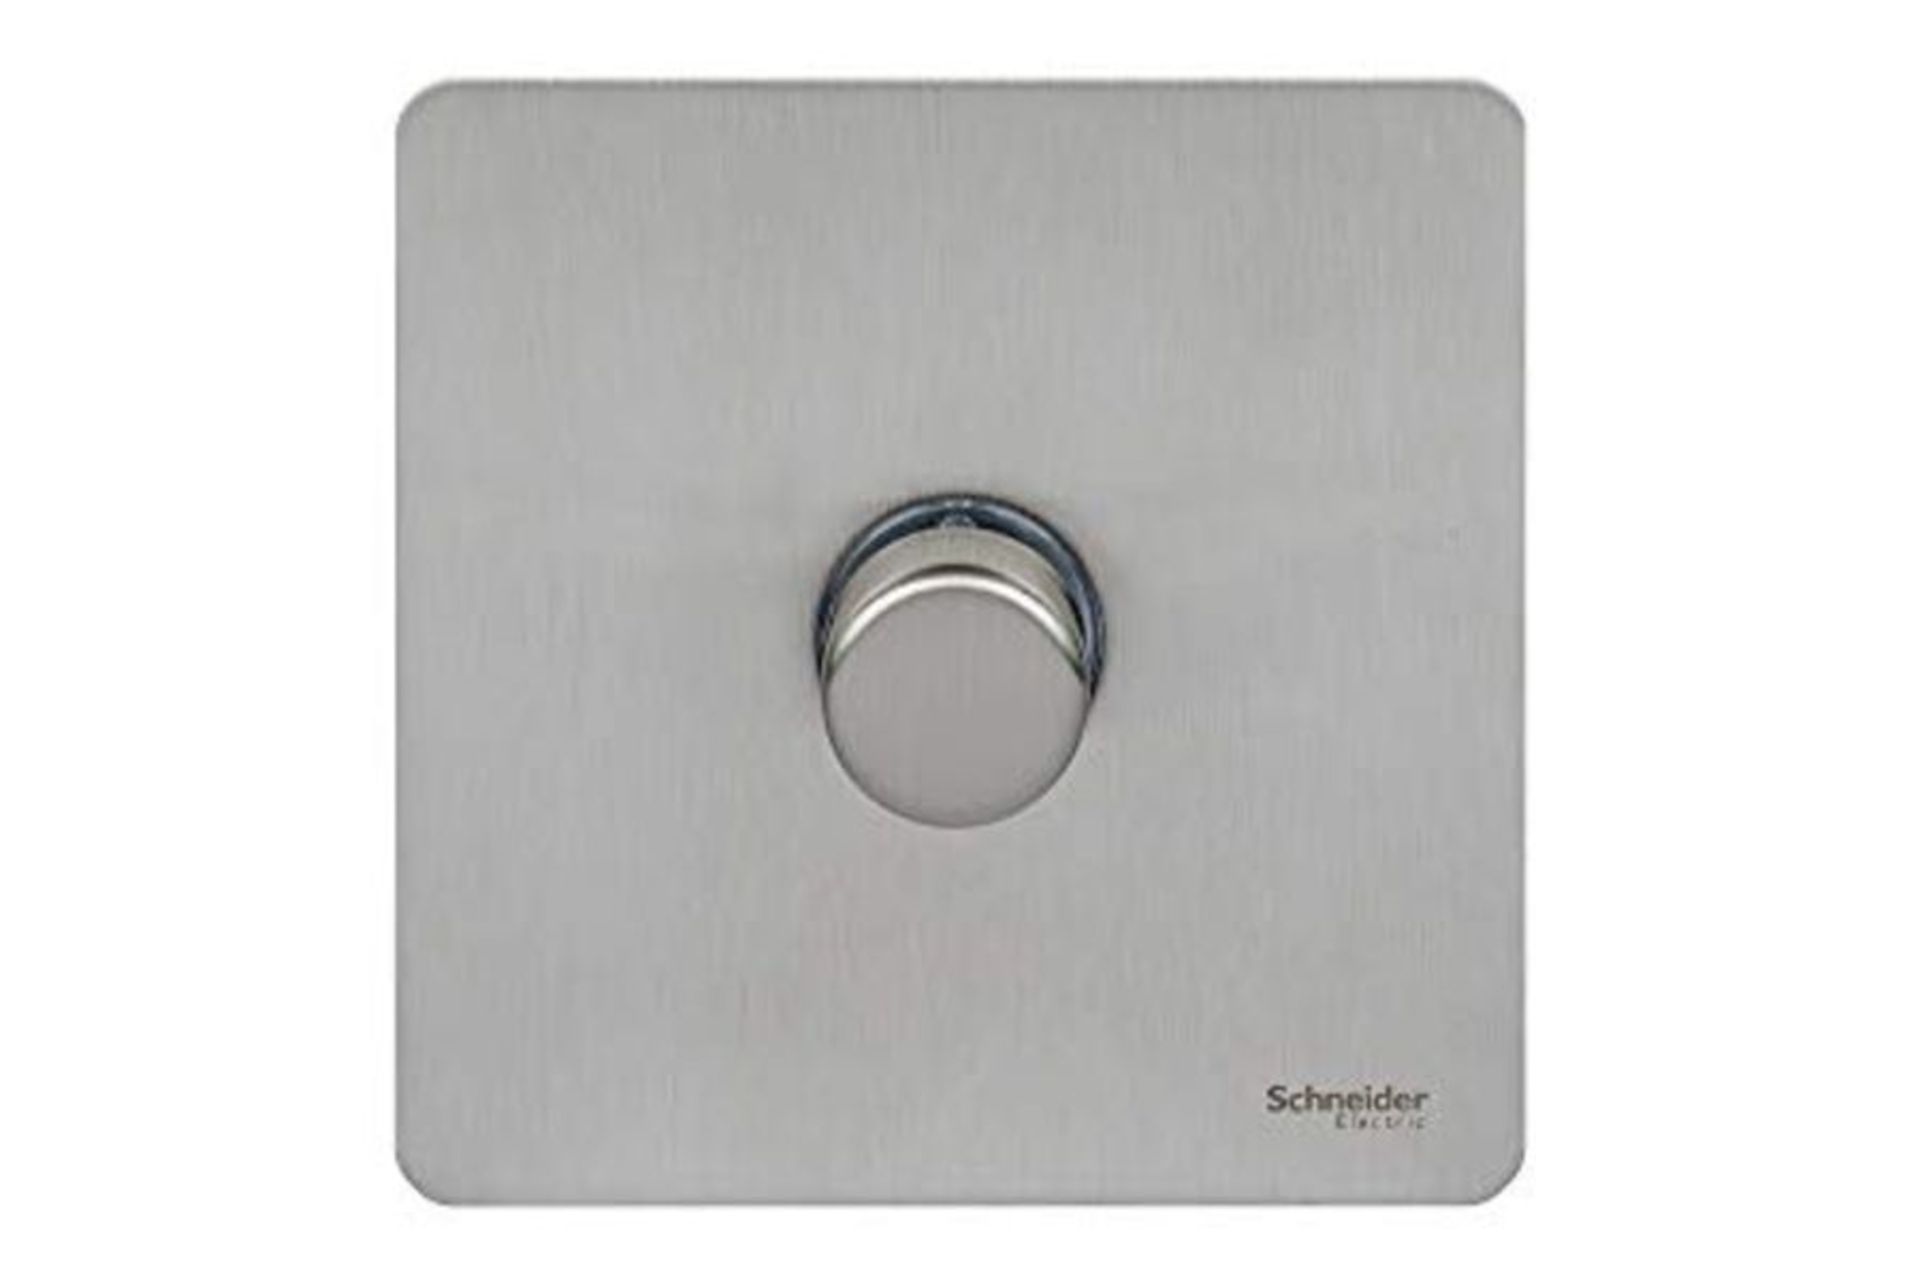 Schneider Electric - Ultimate screwless flat plate (USFP) Single, rotary dimmer light